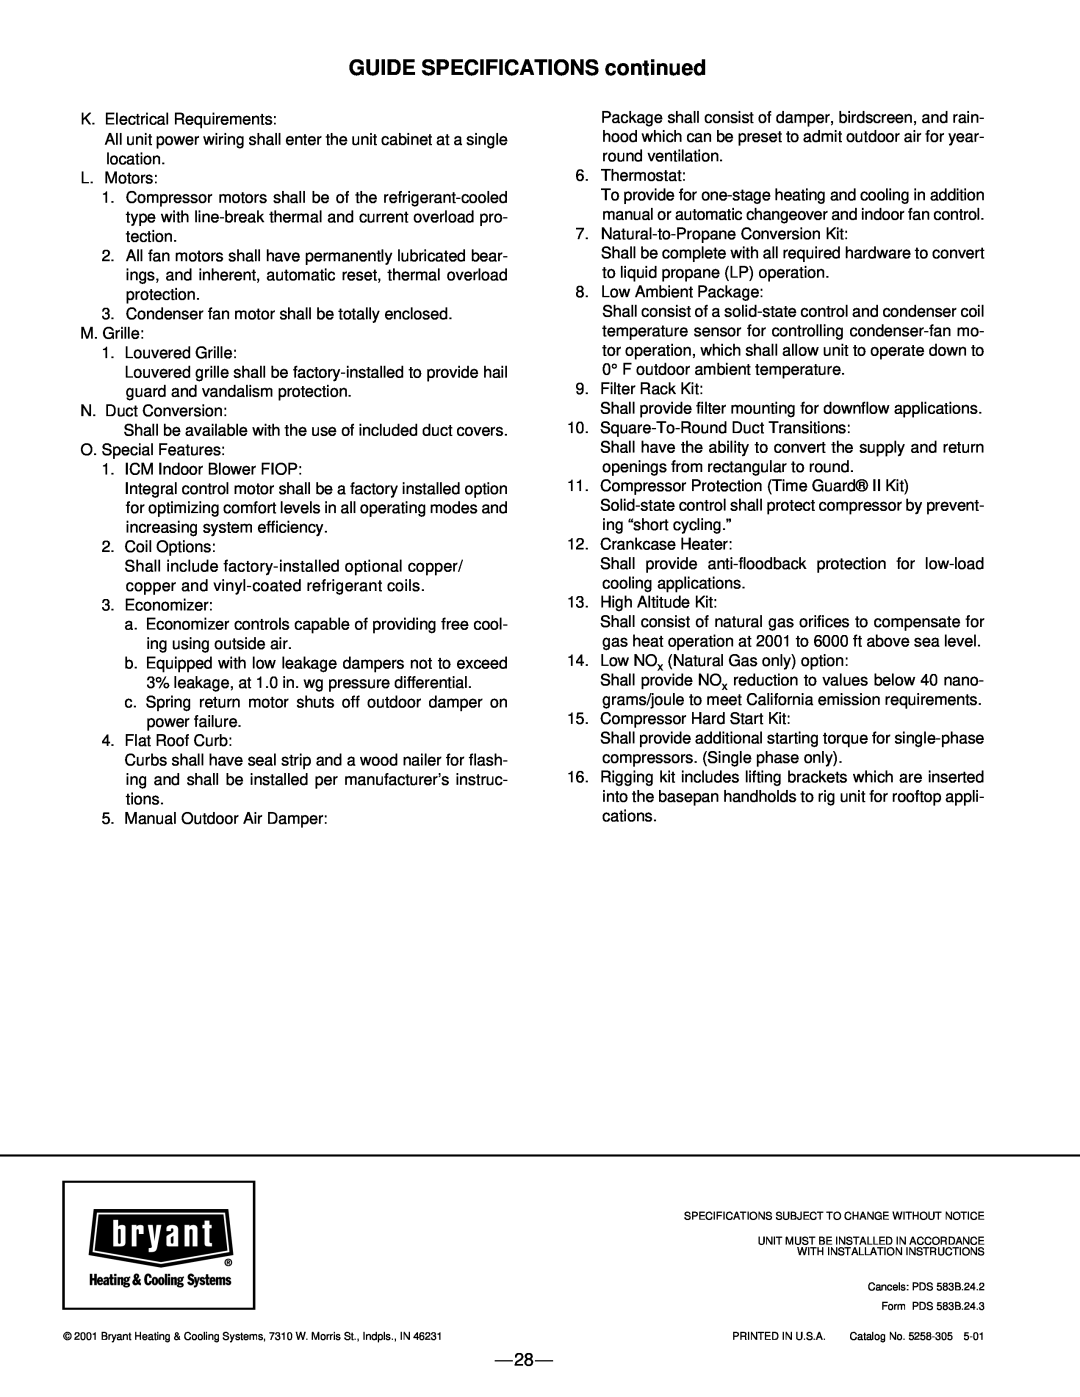 Bryant 583B manual GUIDE SPECIFICATIONS continued 